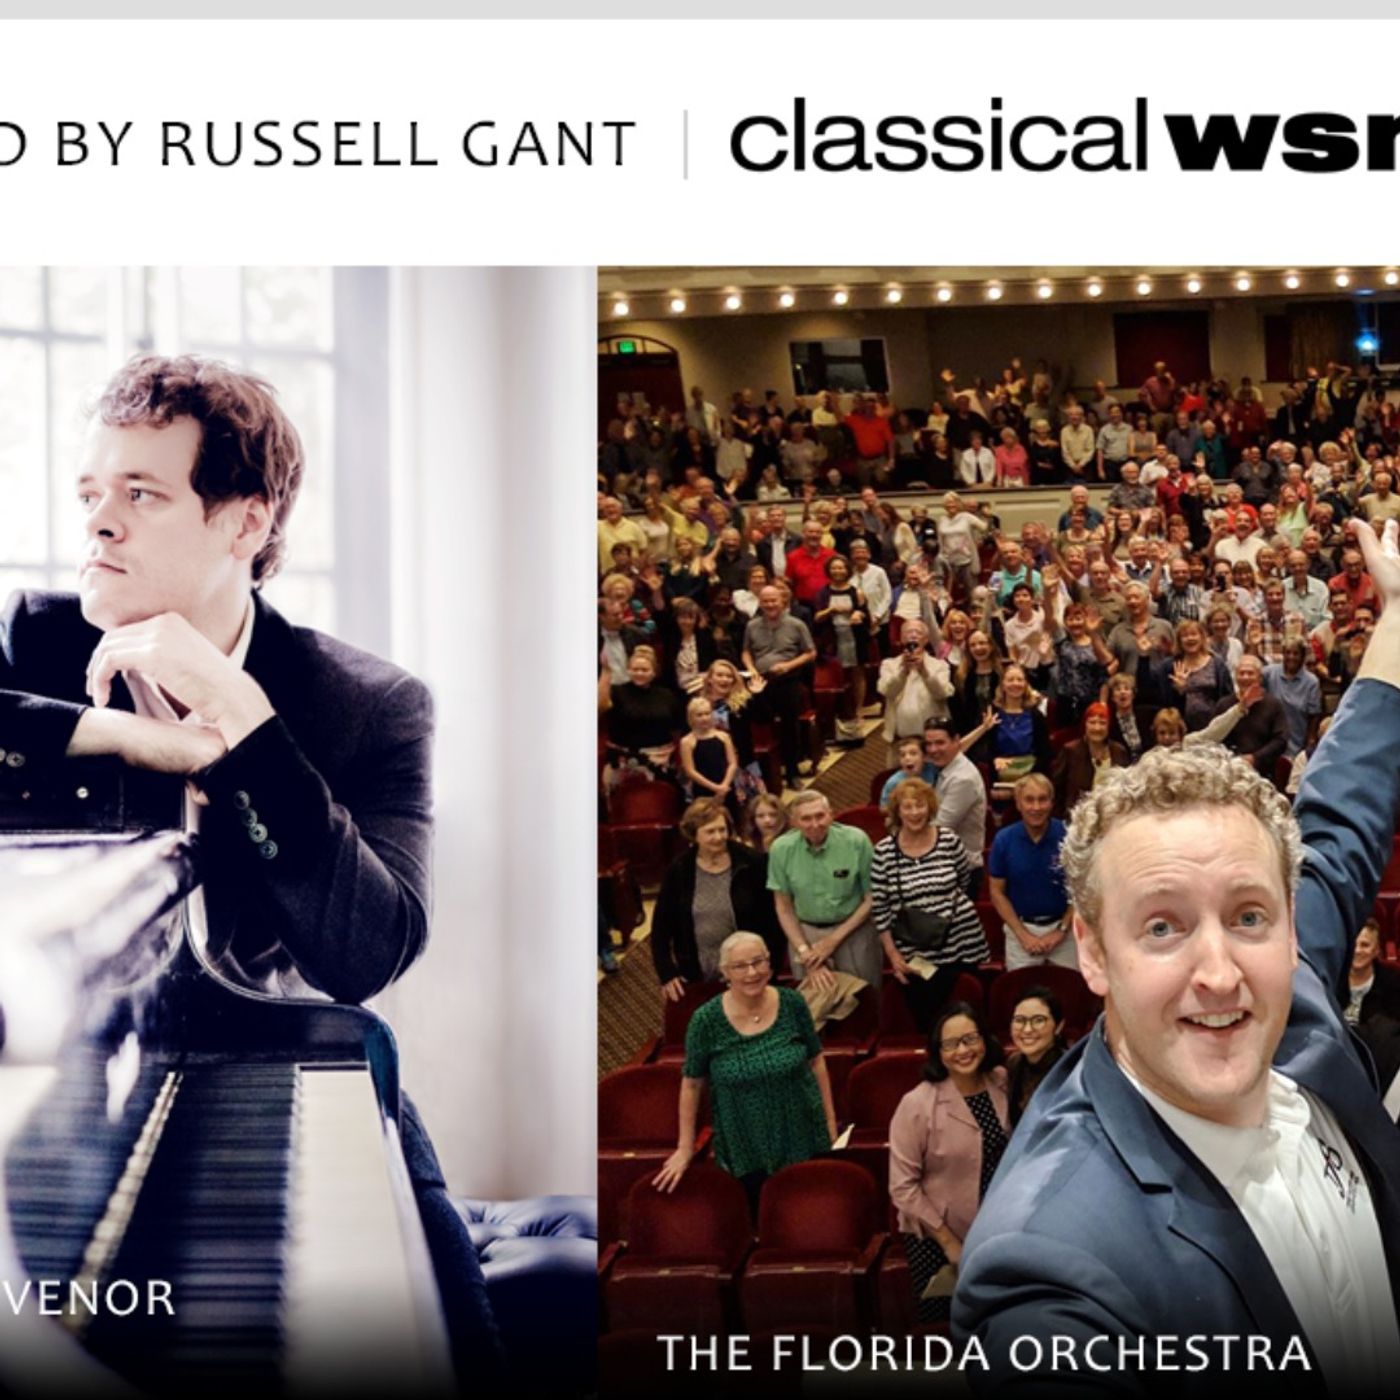 Our Tuesday Concert with The Florida Orchestra Concert Broadcast - Tchaikovsky & Prokofiev for October 4, 2022